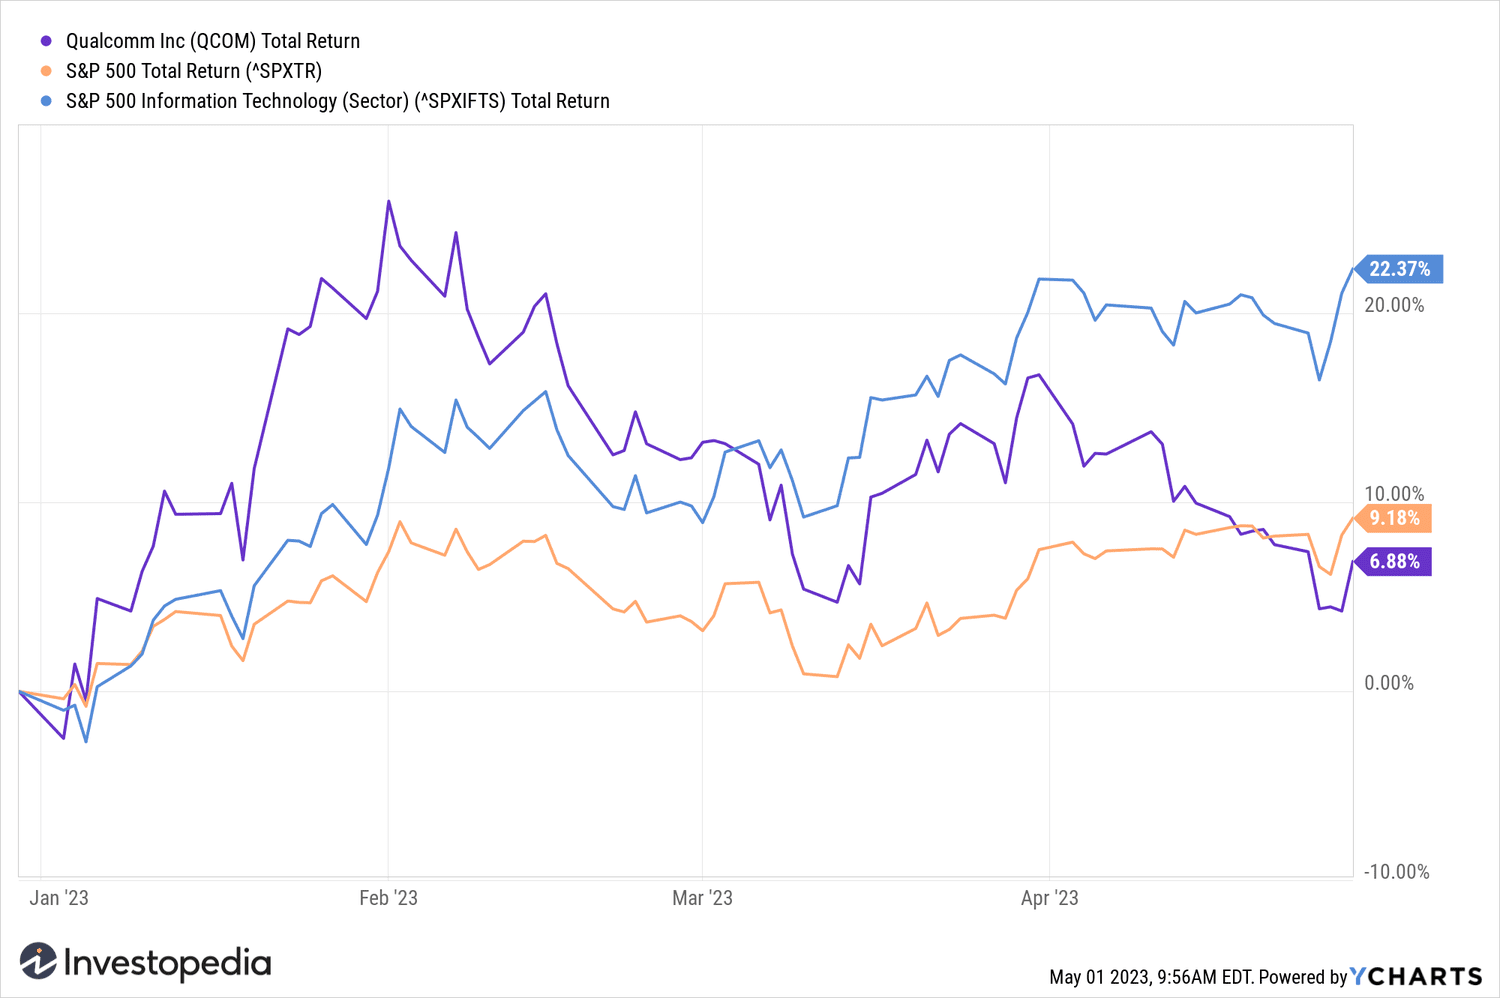 Total year-to-date return of Qualcomm stock, the S&P 500, and the S&P 500 Information Technology Sector Index (as of May 1, 2023).